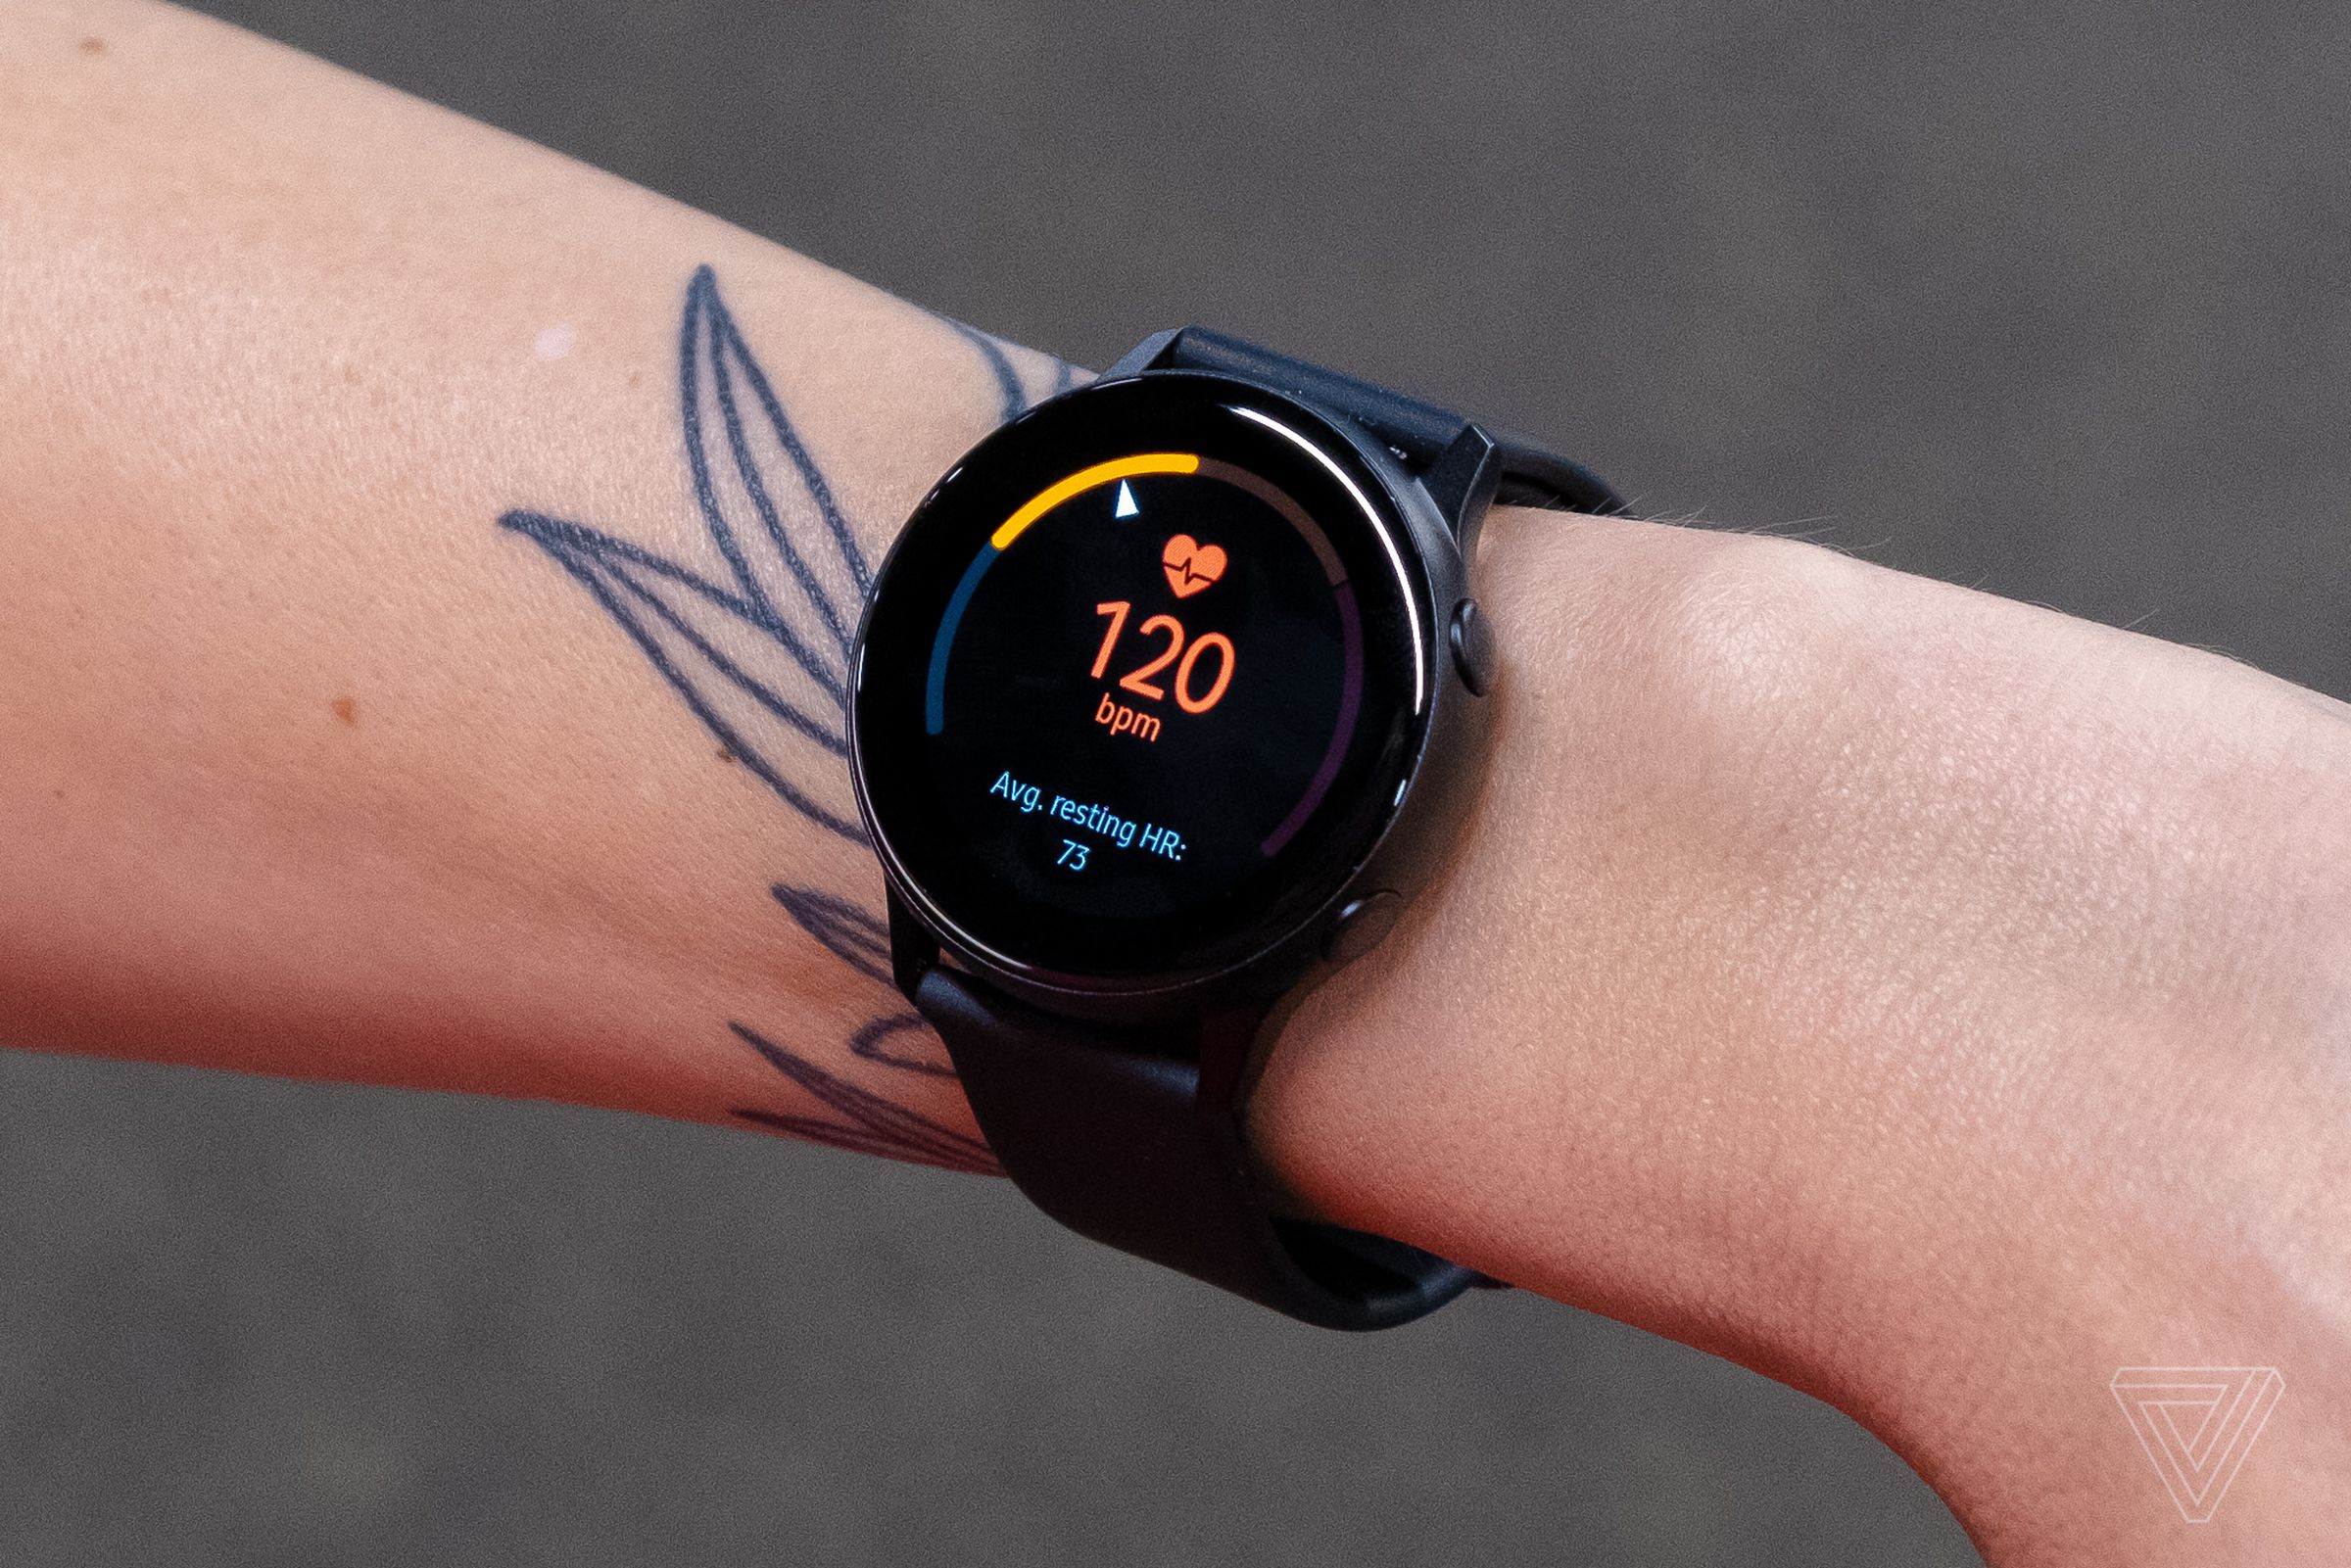 The Galaxy Watch Active isn’t yet able to read blood pressure.